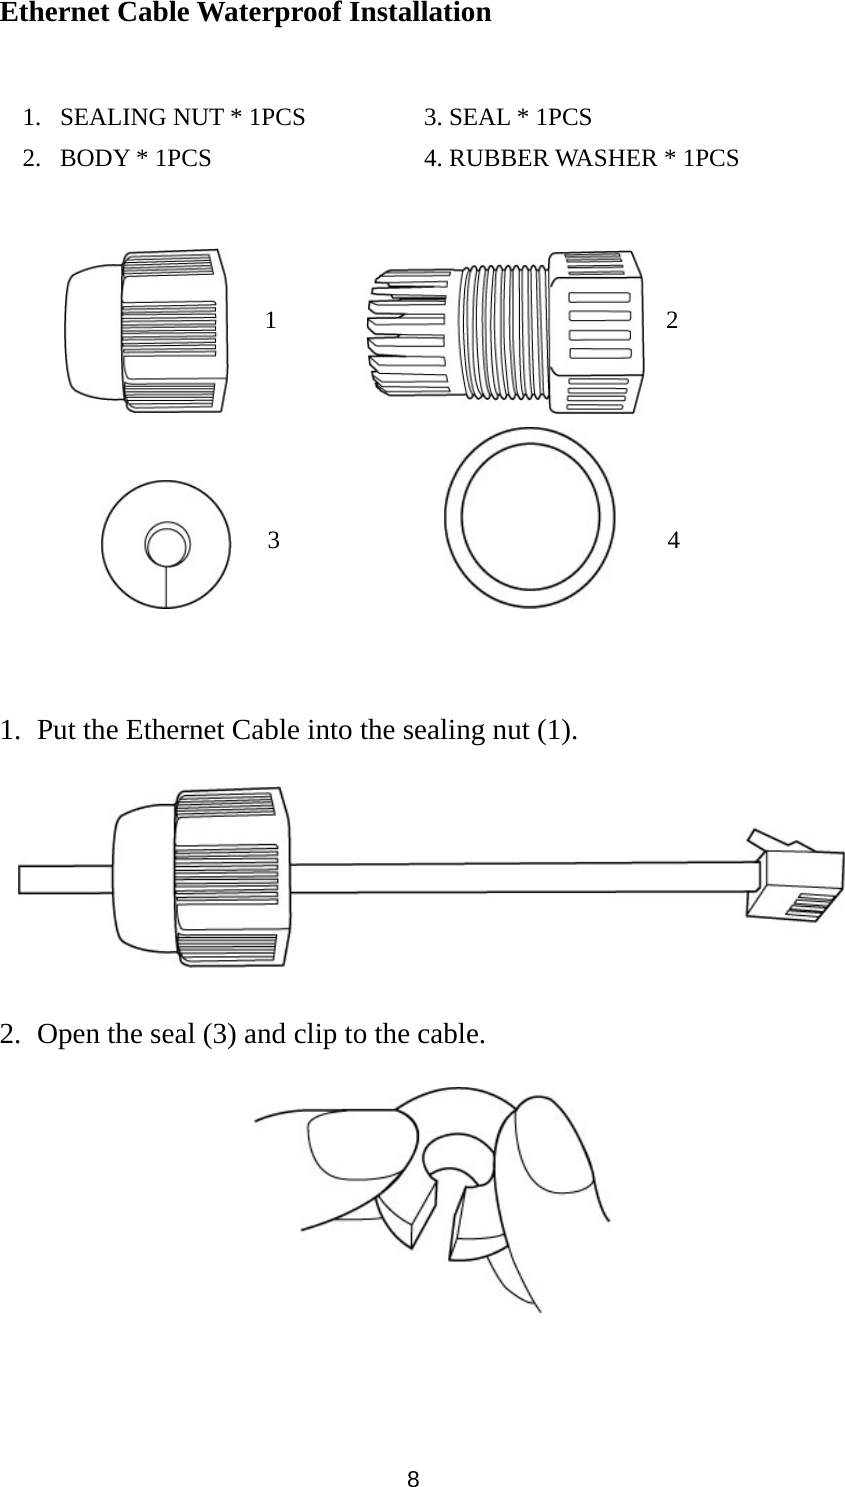 8 Ethernet Cable Waterproof Installation                   1. Put the Ethernet Cable into the sealing nut (1).    2. Open the seal (3) and clip to the cable.                                    1. SEALING NUT * 1PCS      3. SEAL * 1PCS 2. BODY * 1PCS          4. RUBBER WASHER * 1PCS 1  243 